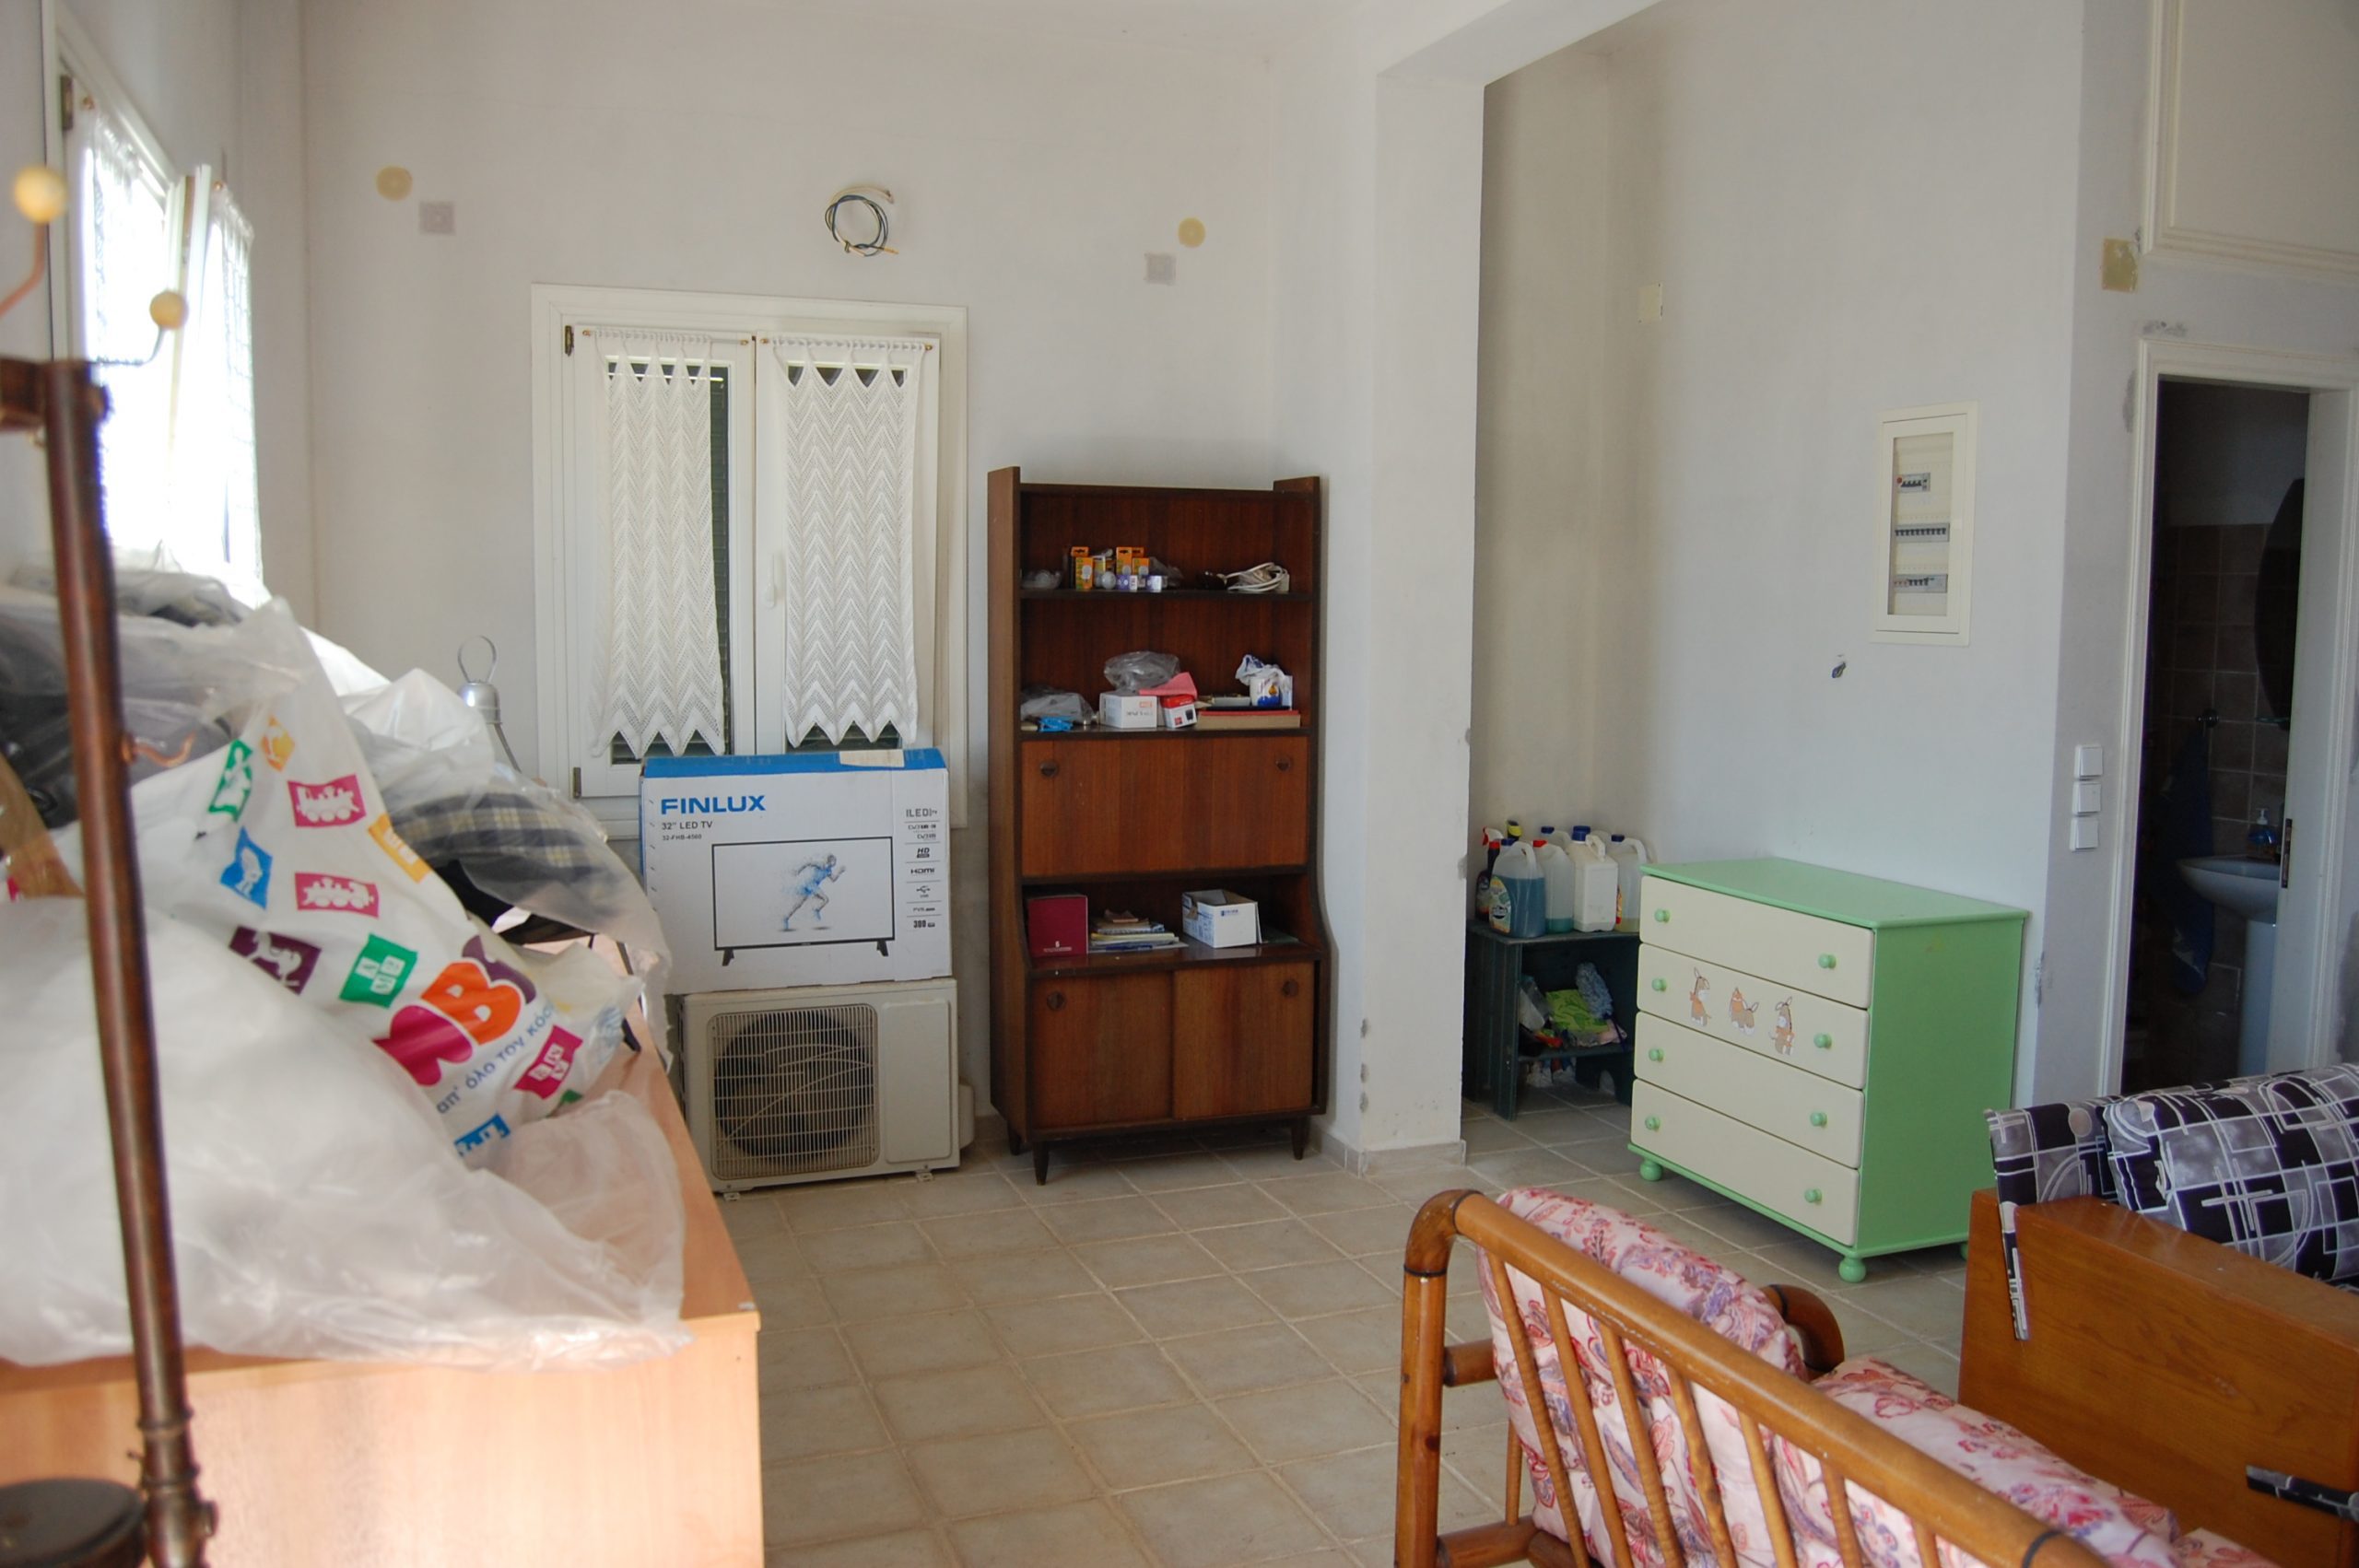 Interior of flat underneath property for sale in Ithaca Greece Perachori